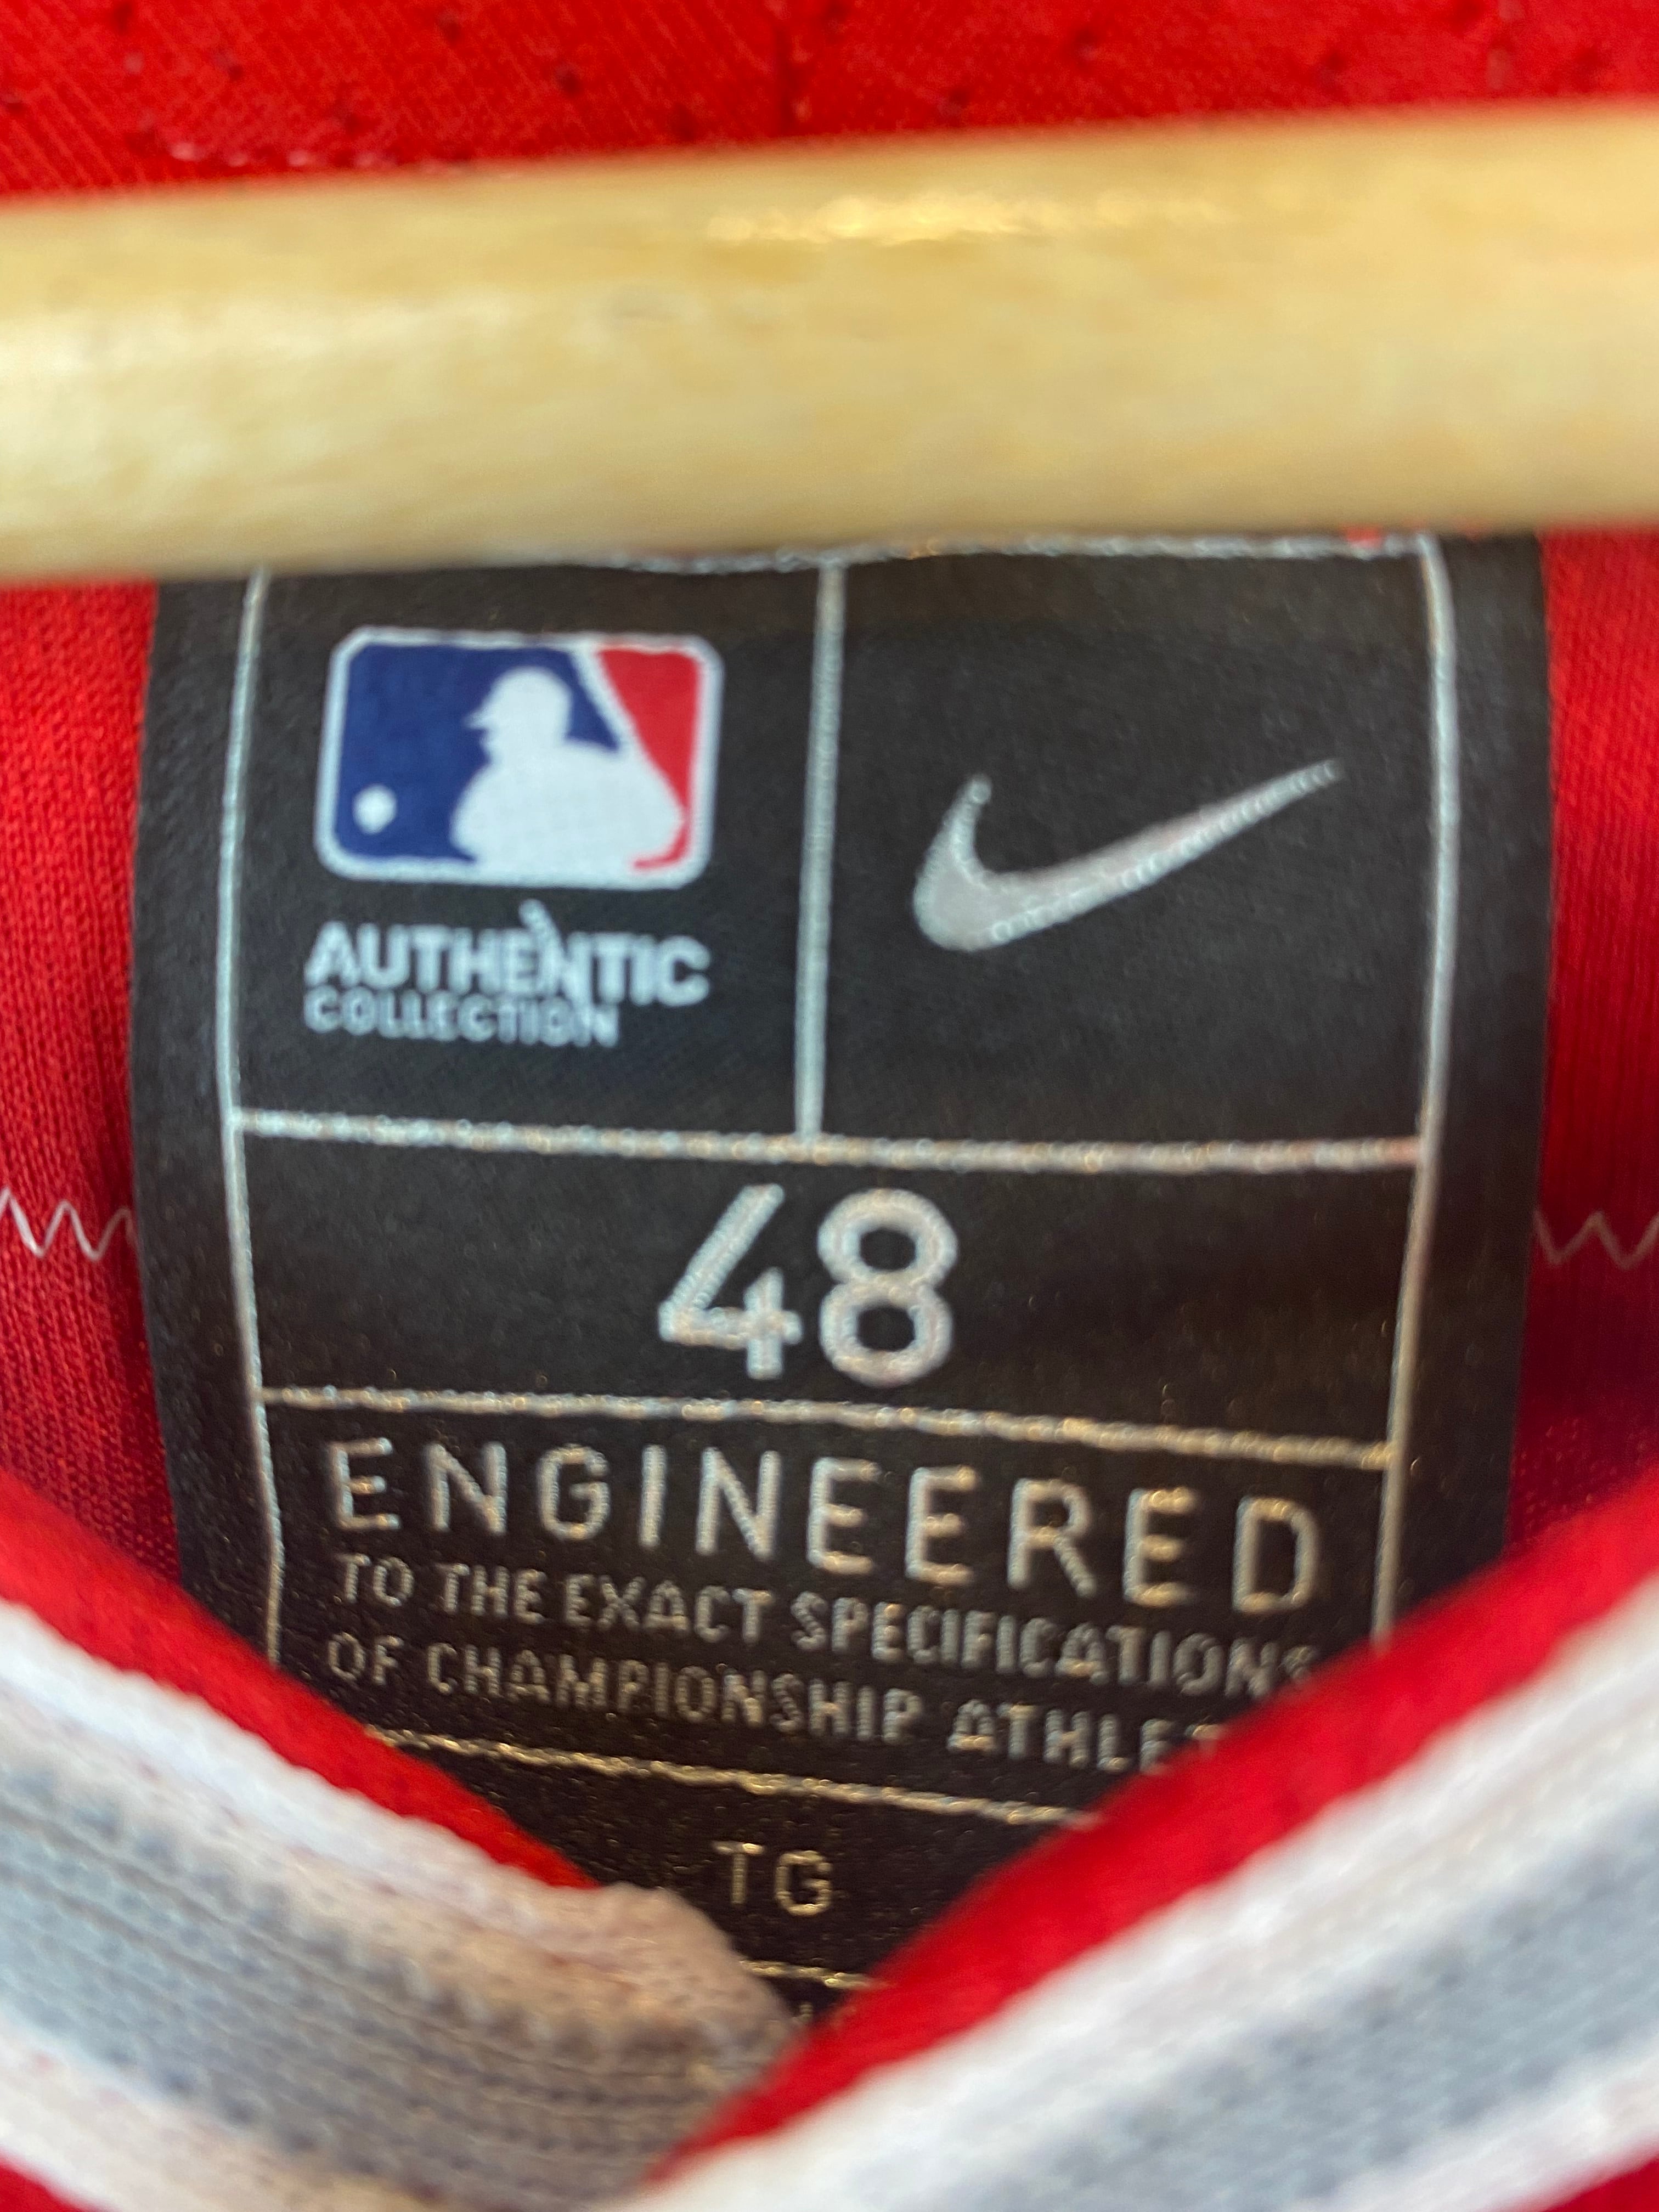 Shohei Ohtani Los Angeles Angels Signed Red Nike Replica Jersey MLB Fa –  Diamond Legends Online